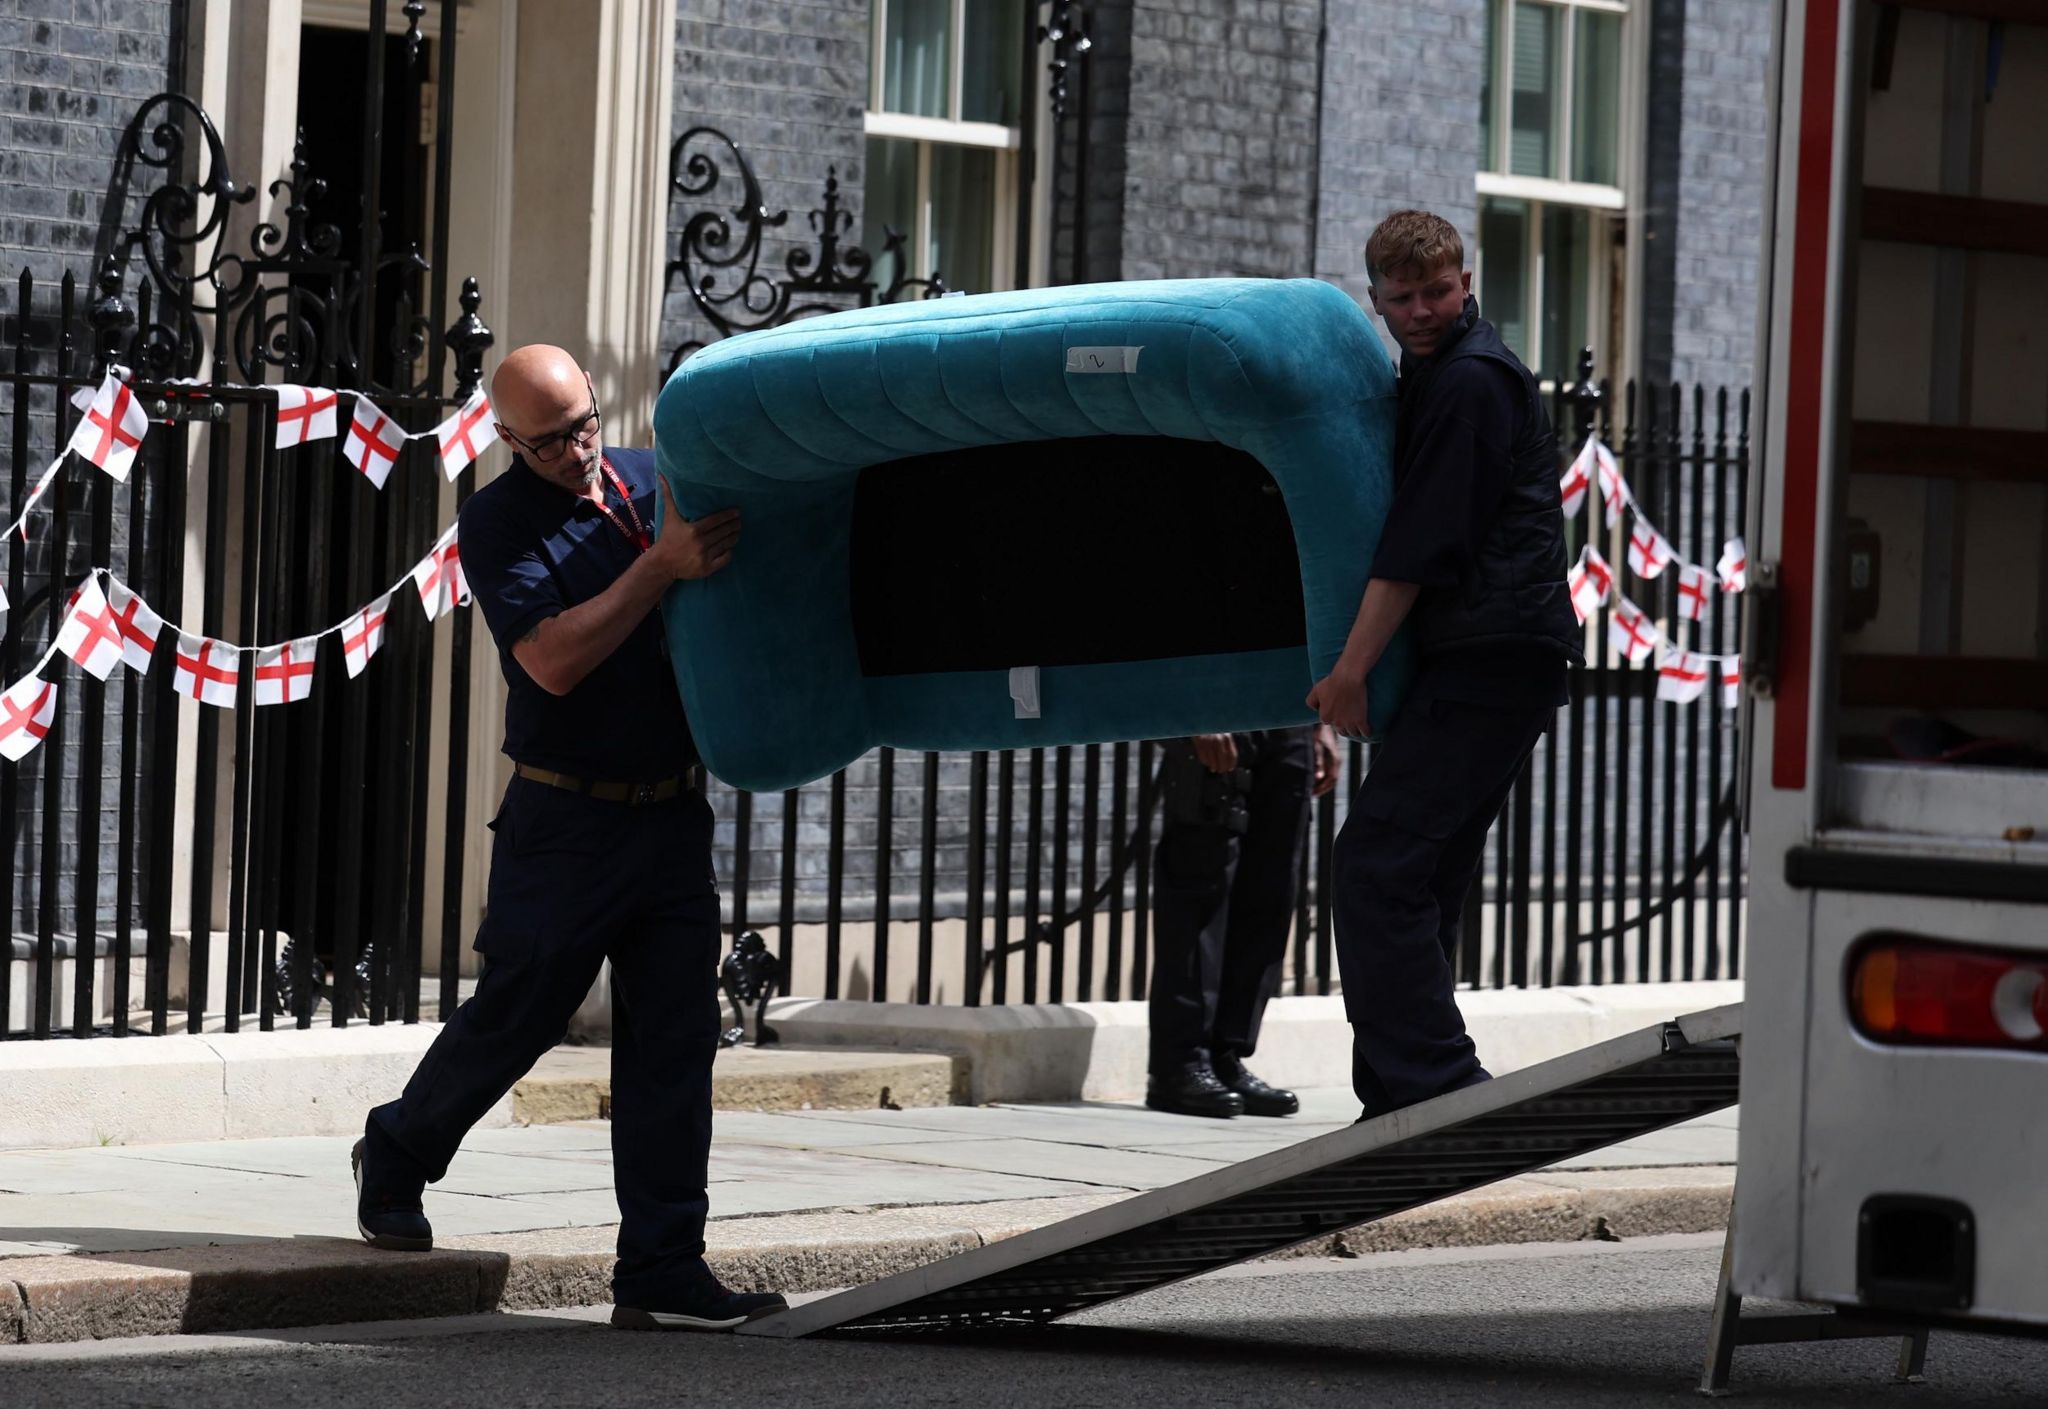 Two men carry a turquoise sofa into a van outside Downing Street